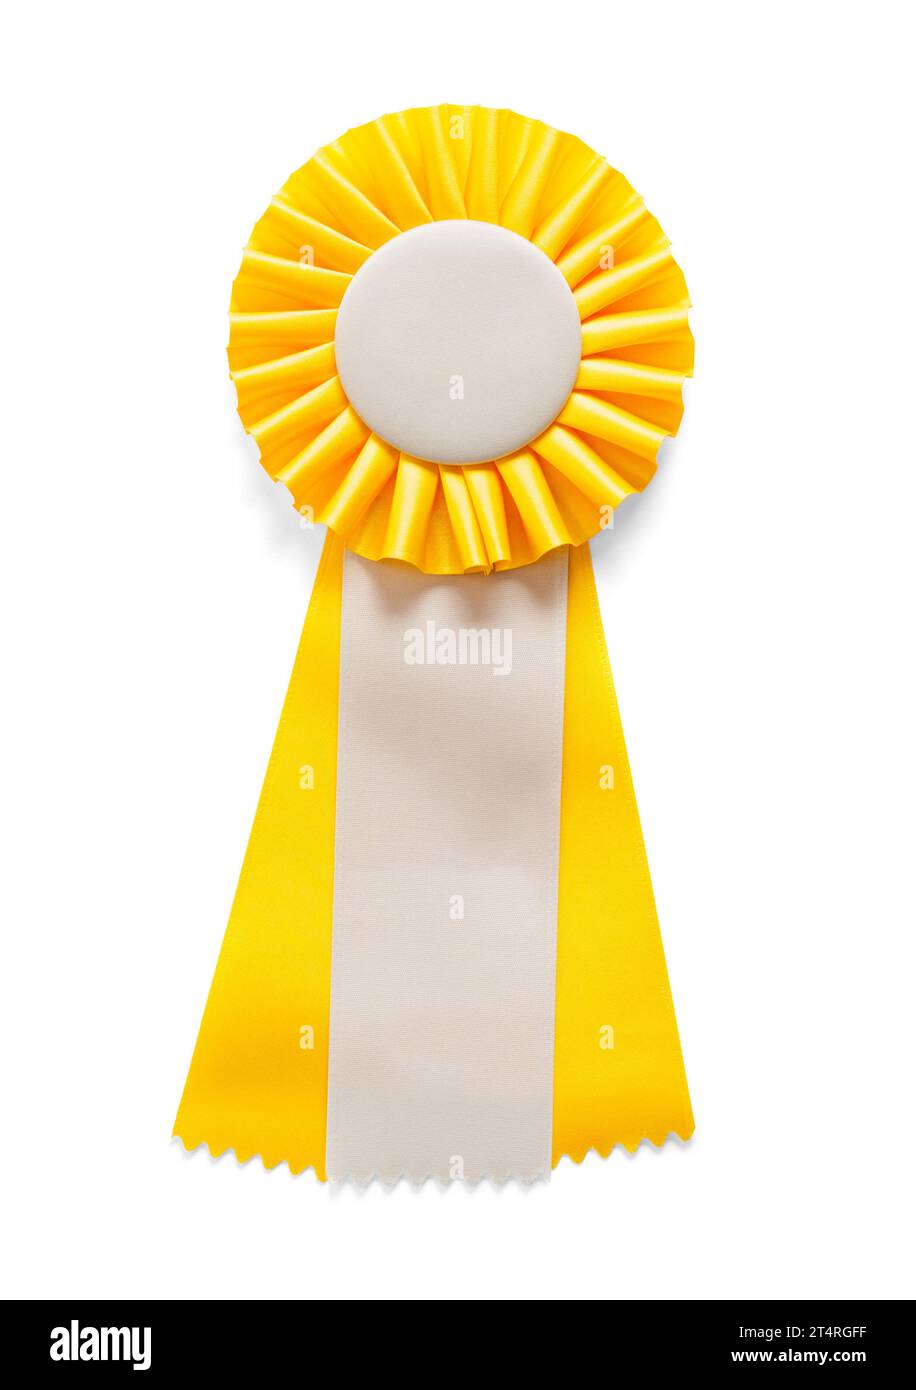 Yellow Award Ribbon with Copy Space Cut Out on White. Stock Photo